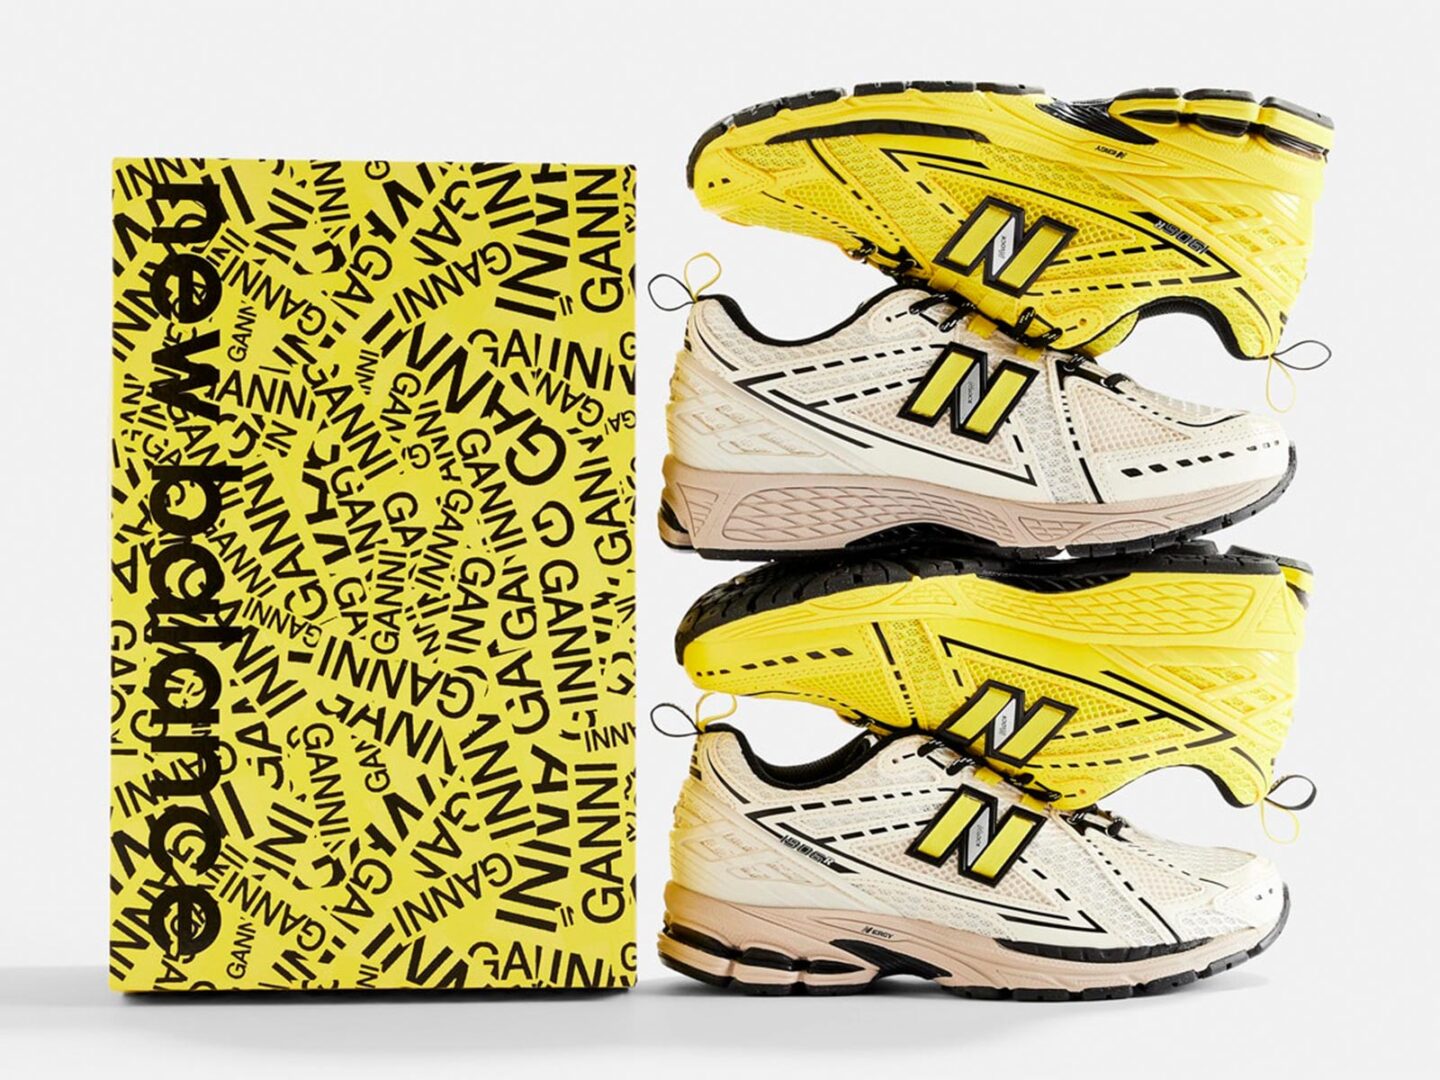 All the details about the collaboration between GANNI and New Balance